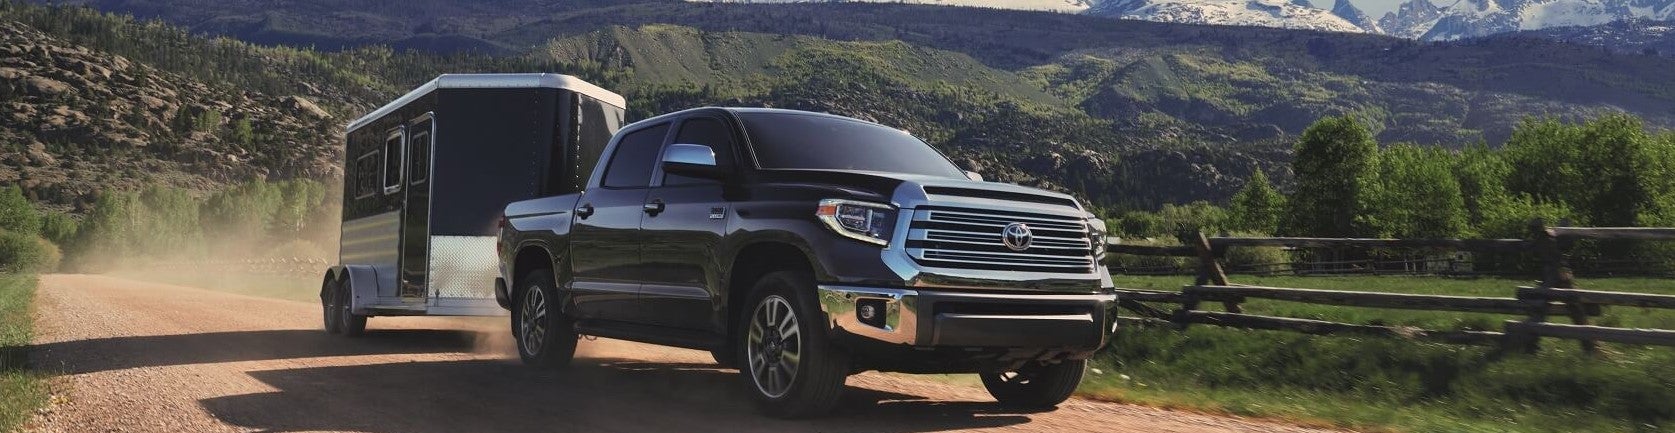 Toyota Tundra Towing Capacity Avon IN | Andy Mohr Toyota